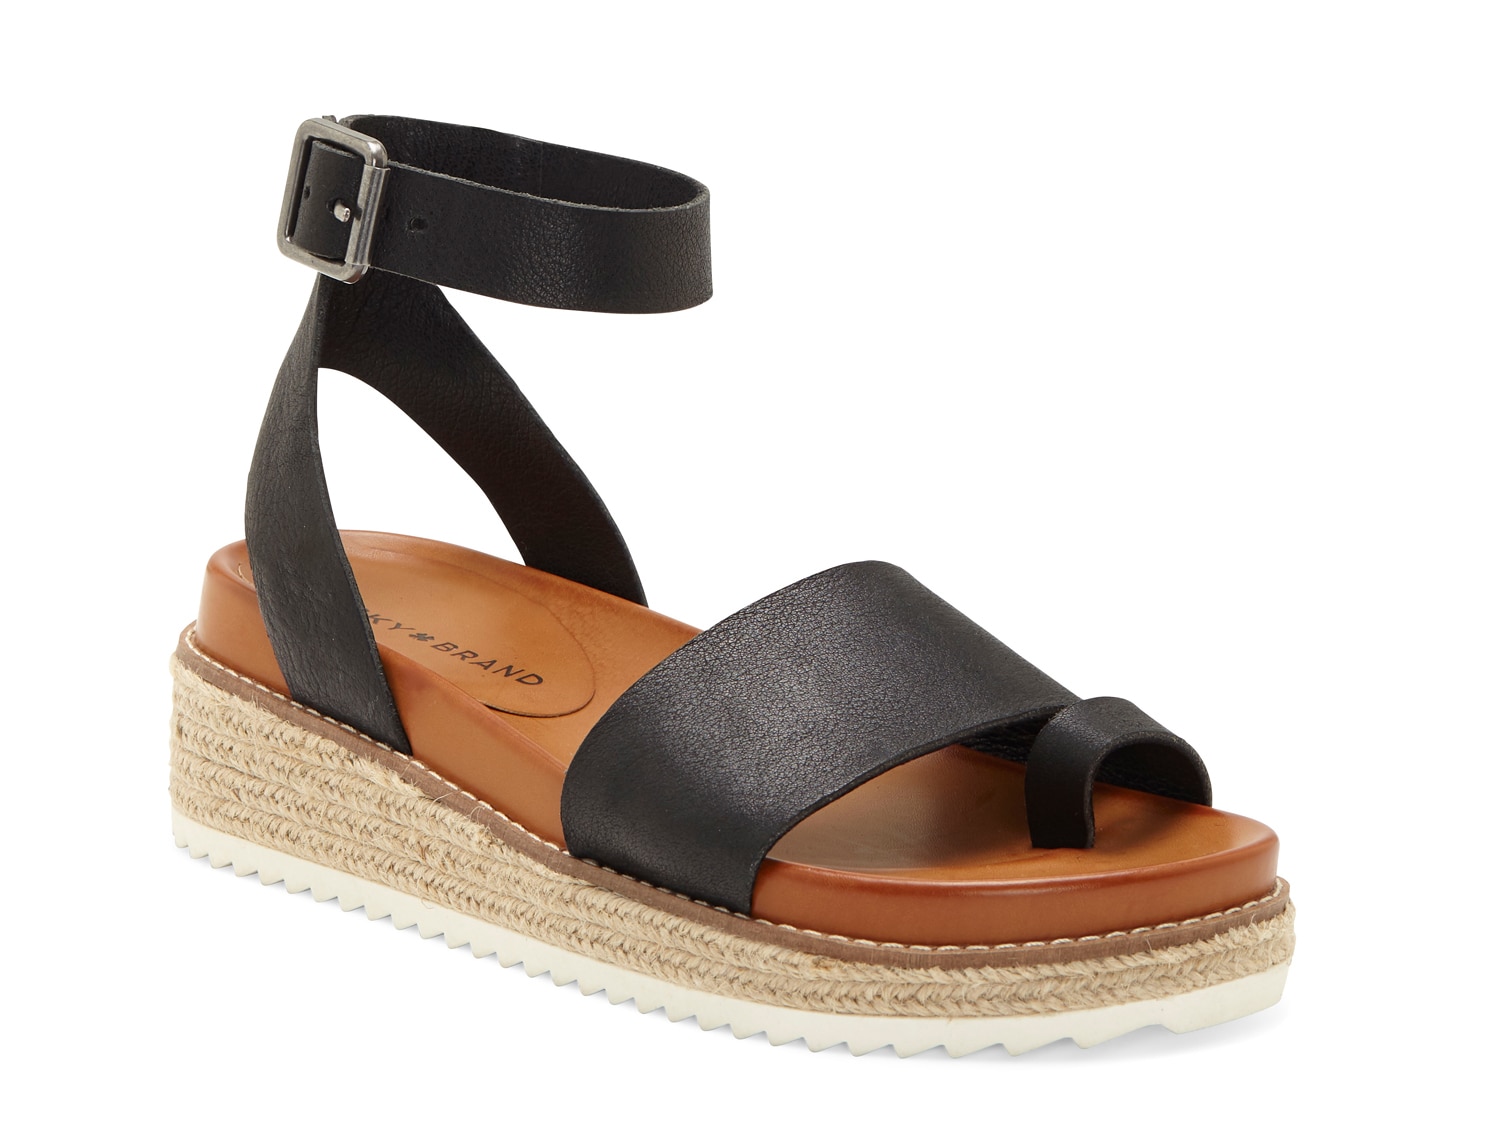 Lucky Brand Itolva Espadrille Wedge Sandal - Free Shipping | DSW